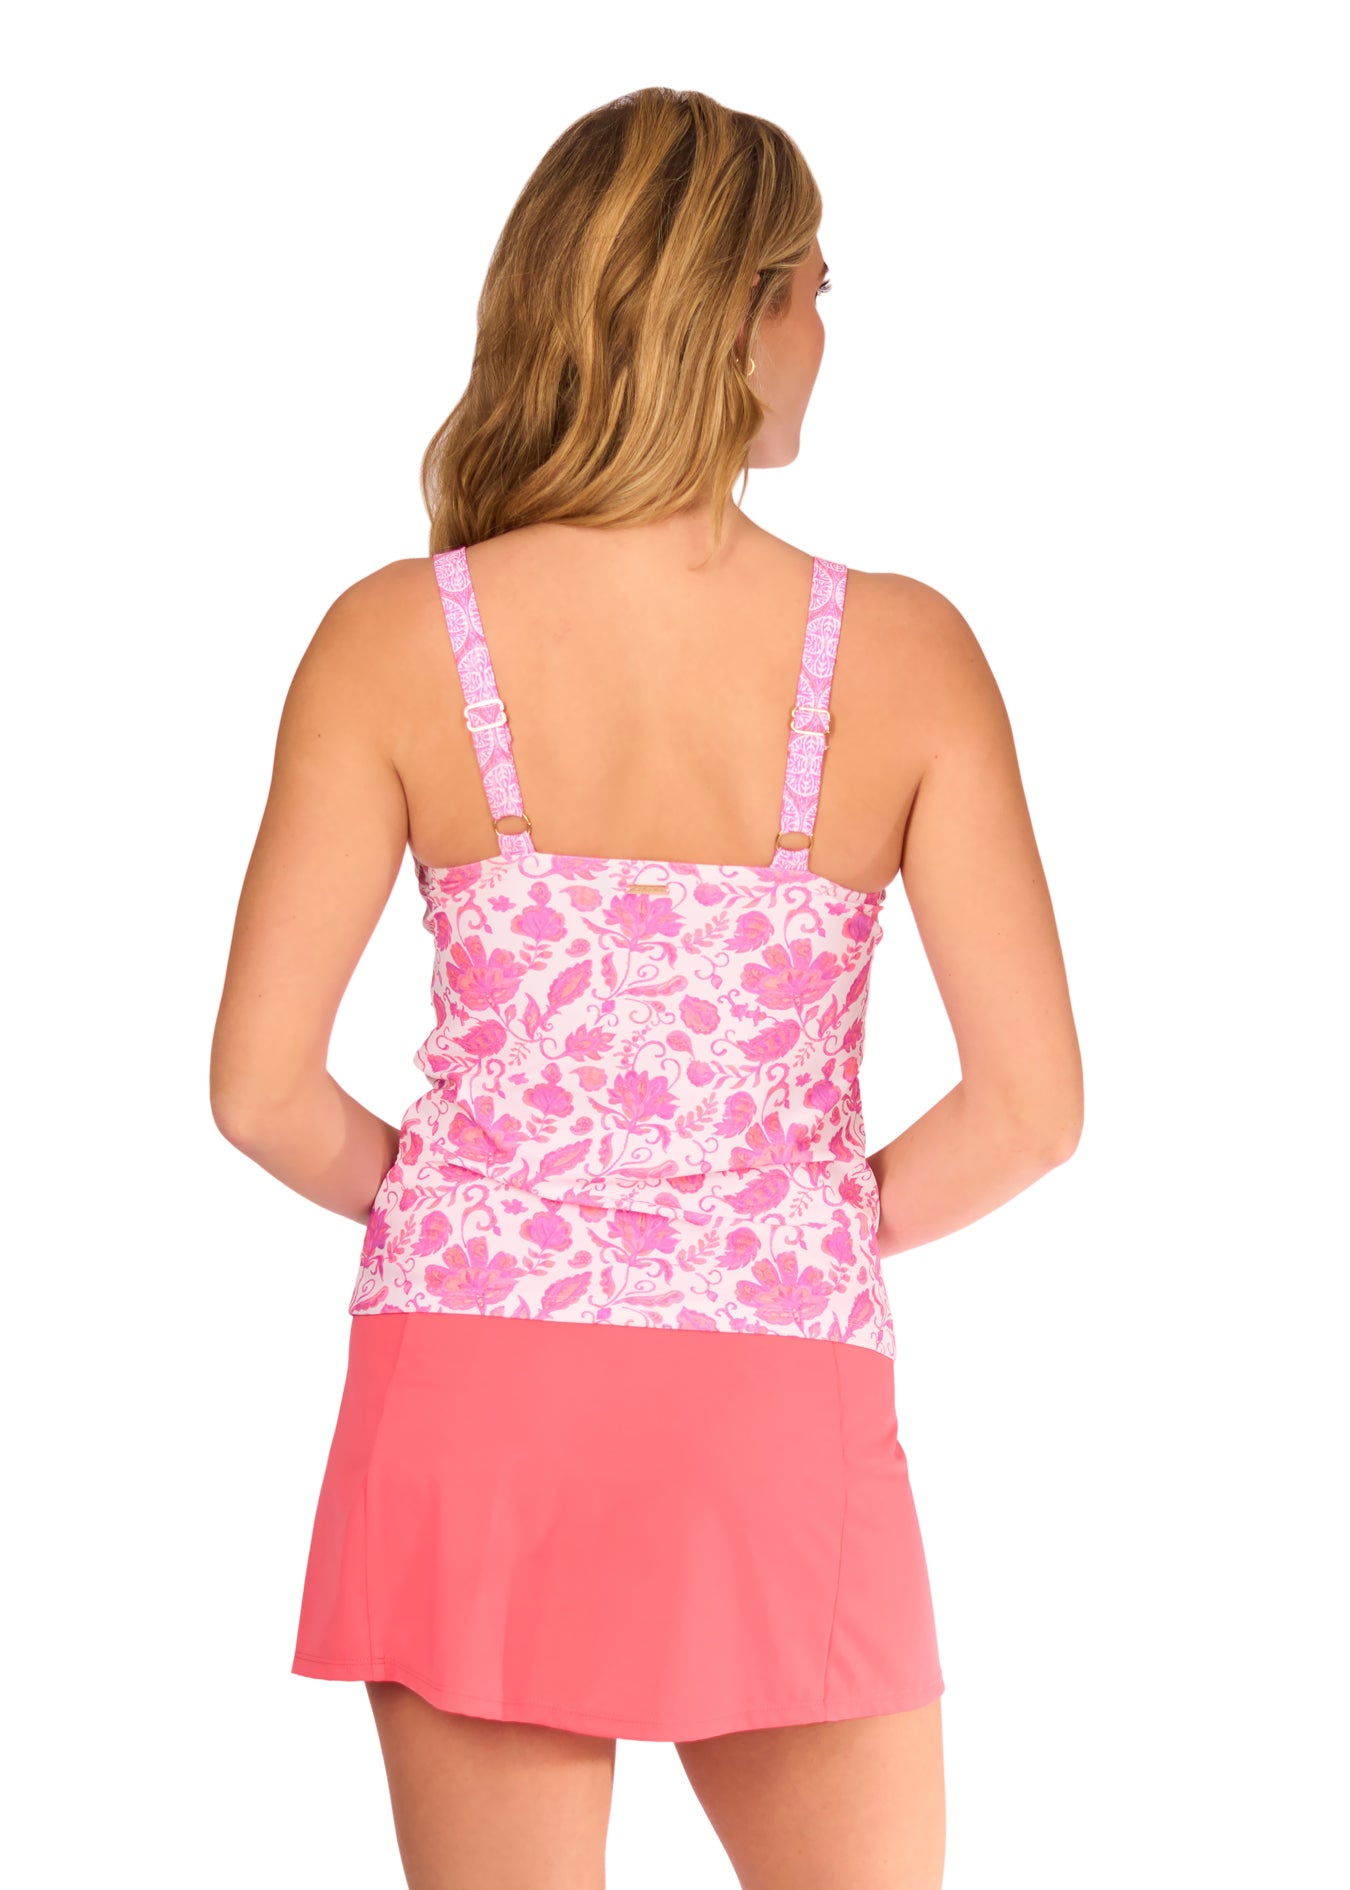 Back of woman in Provence Tankini Top and Coral Classic Swim Skirt.